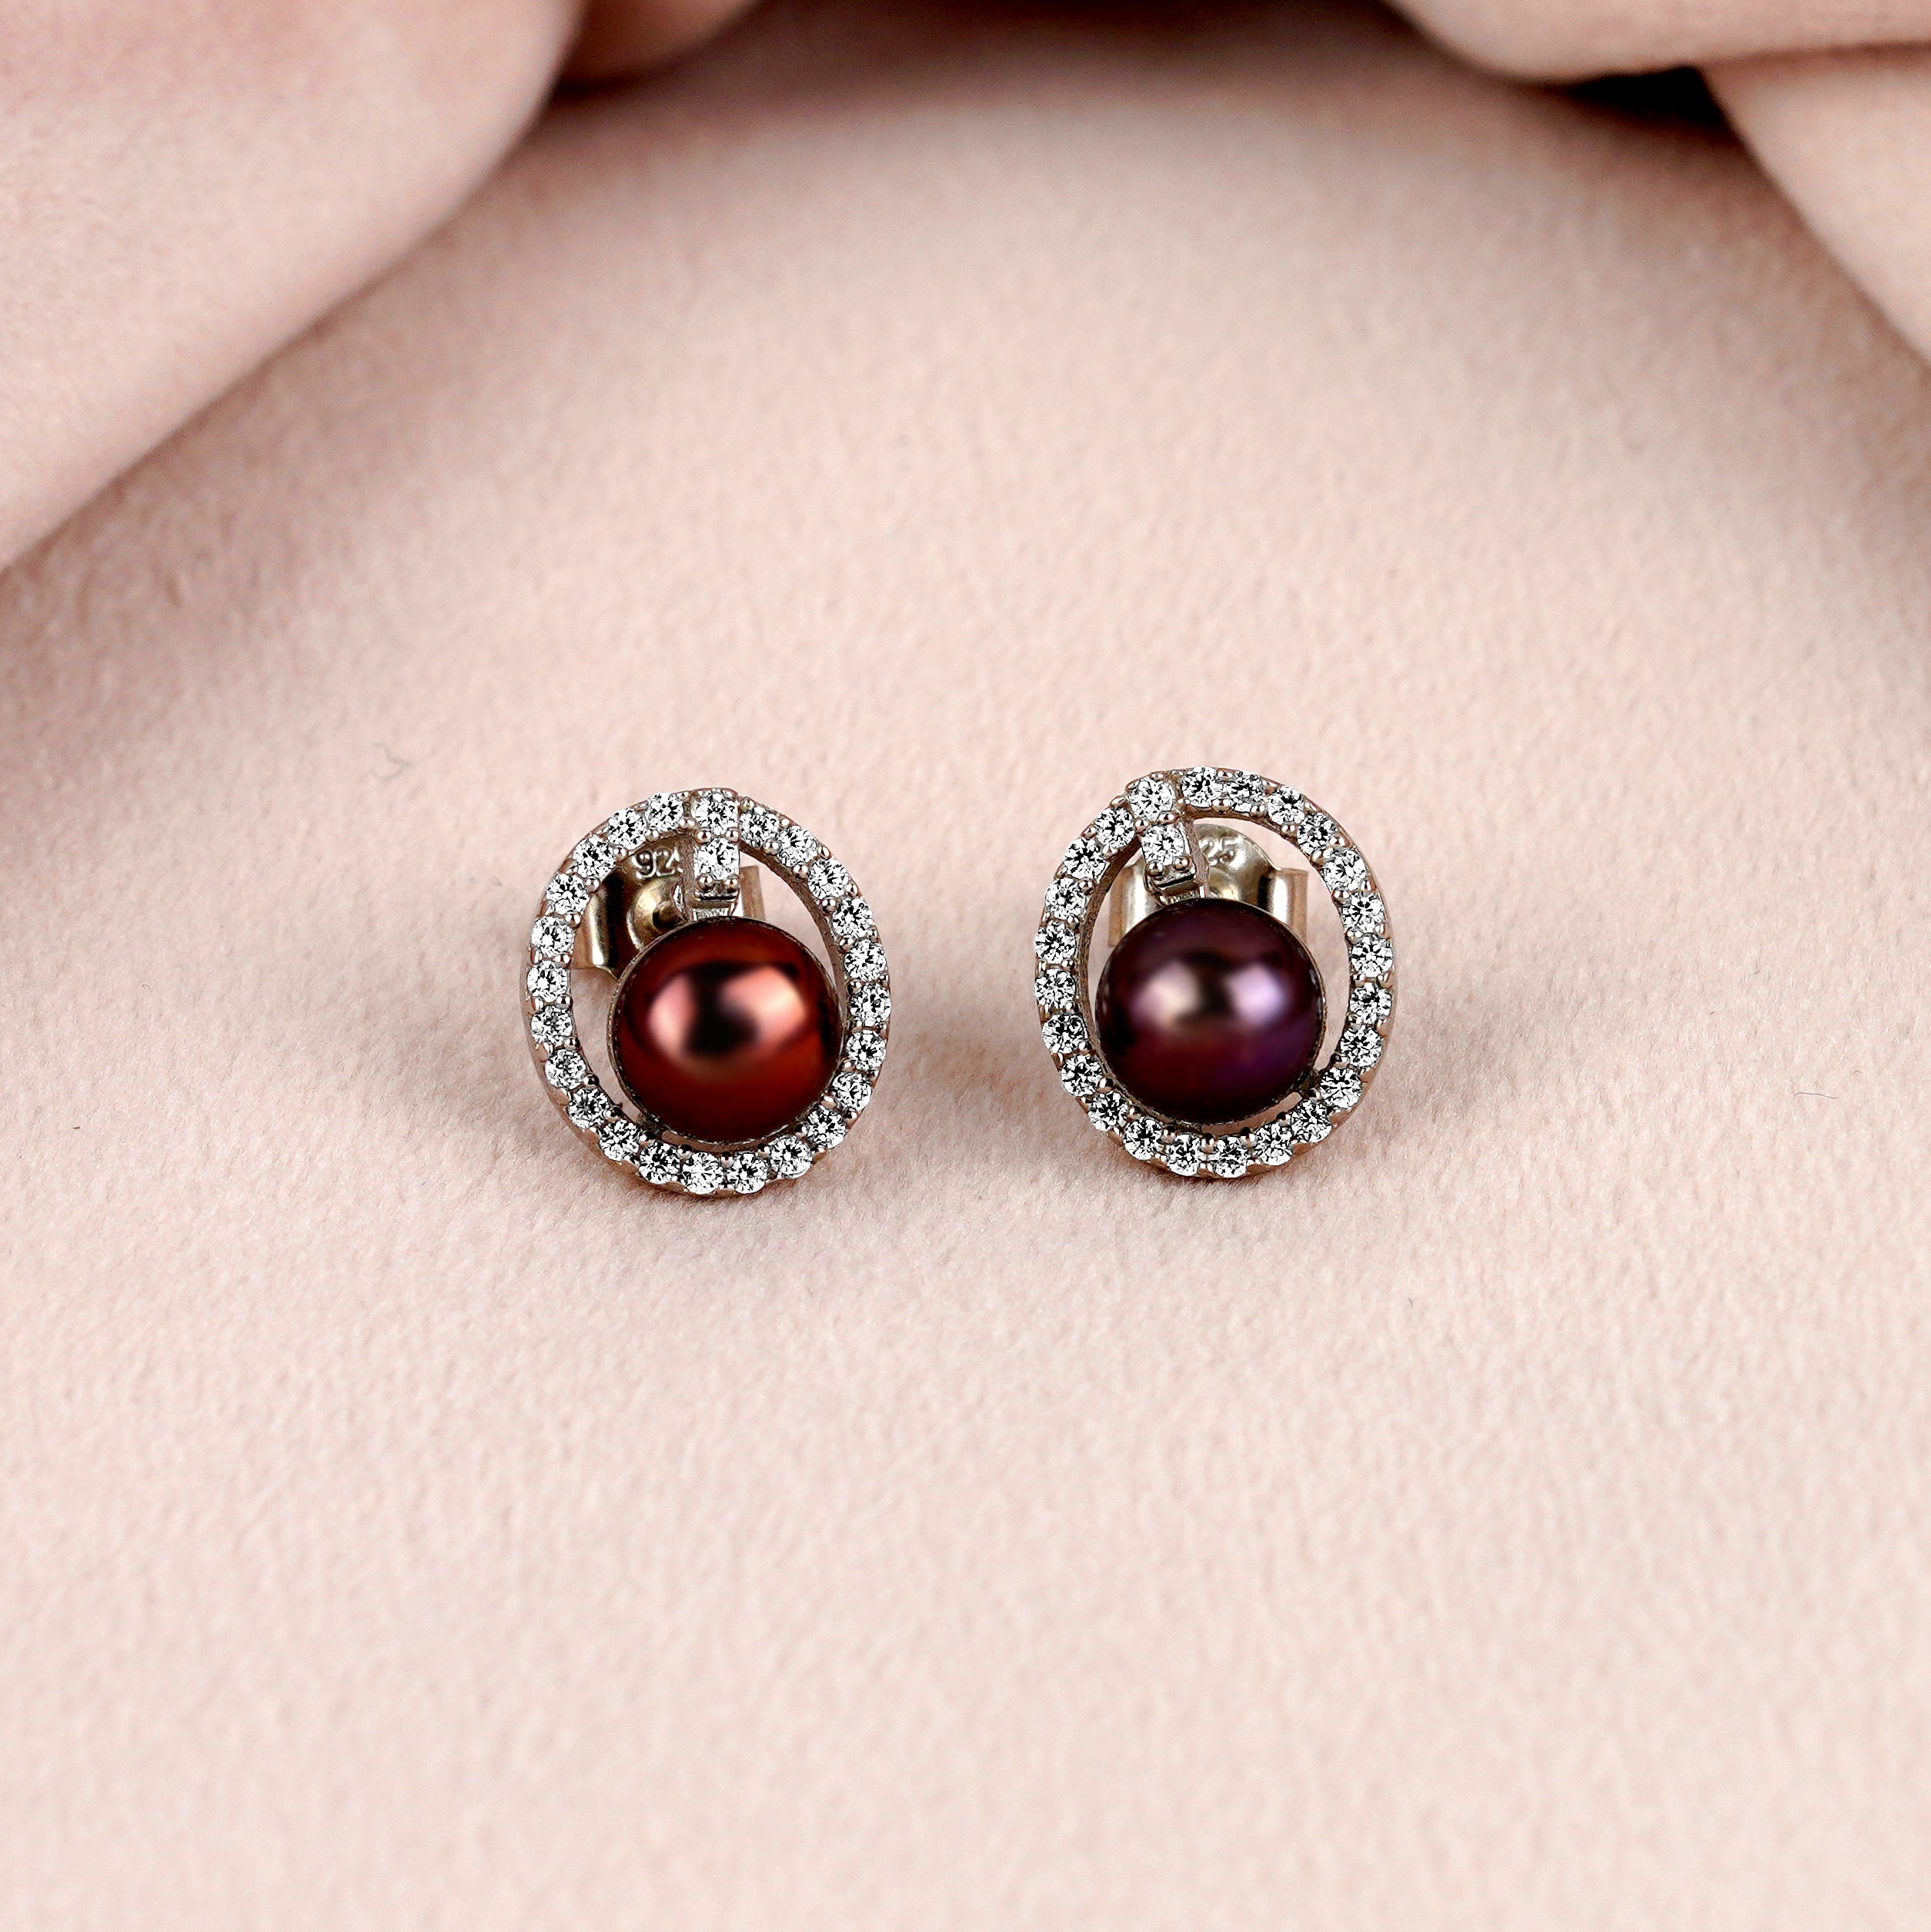 Captivating stud earrings set with a fresh water pearl and CZ stones